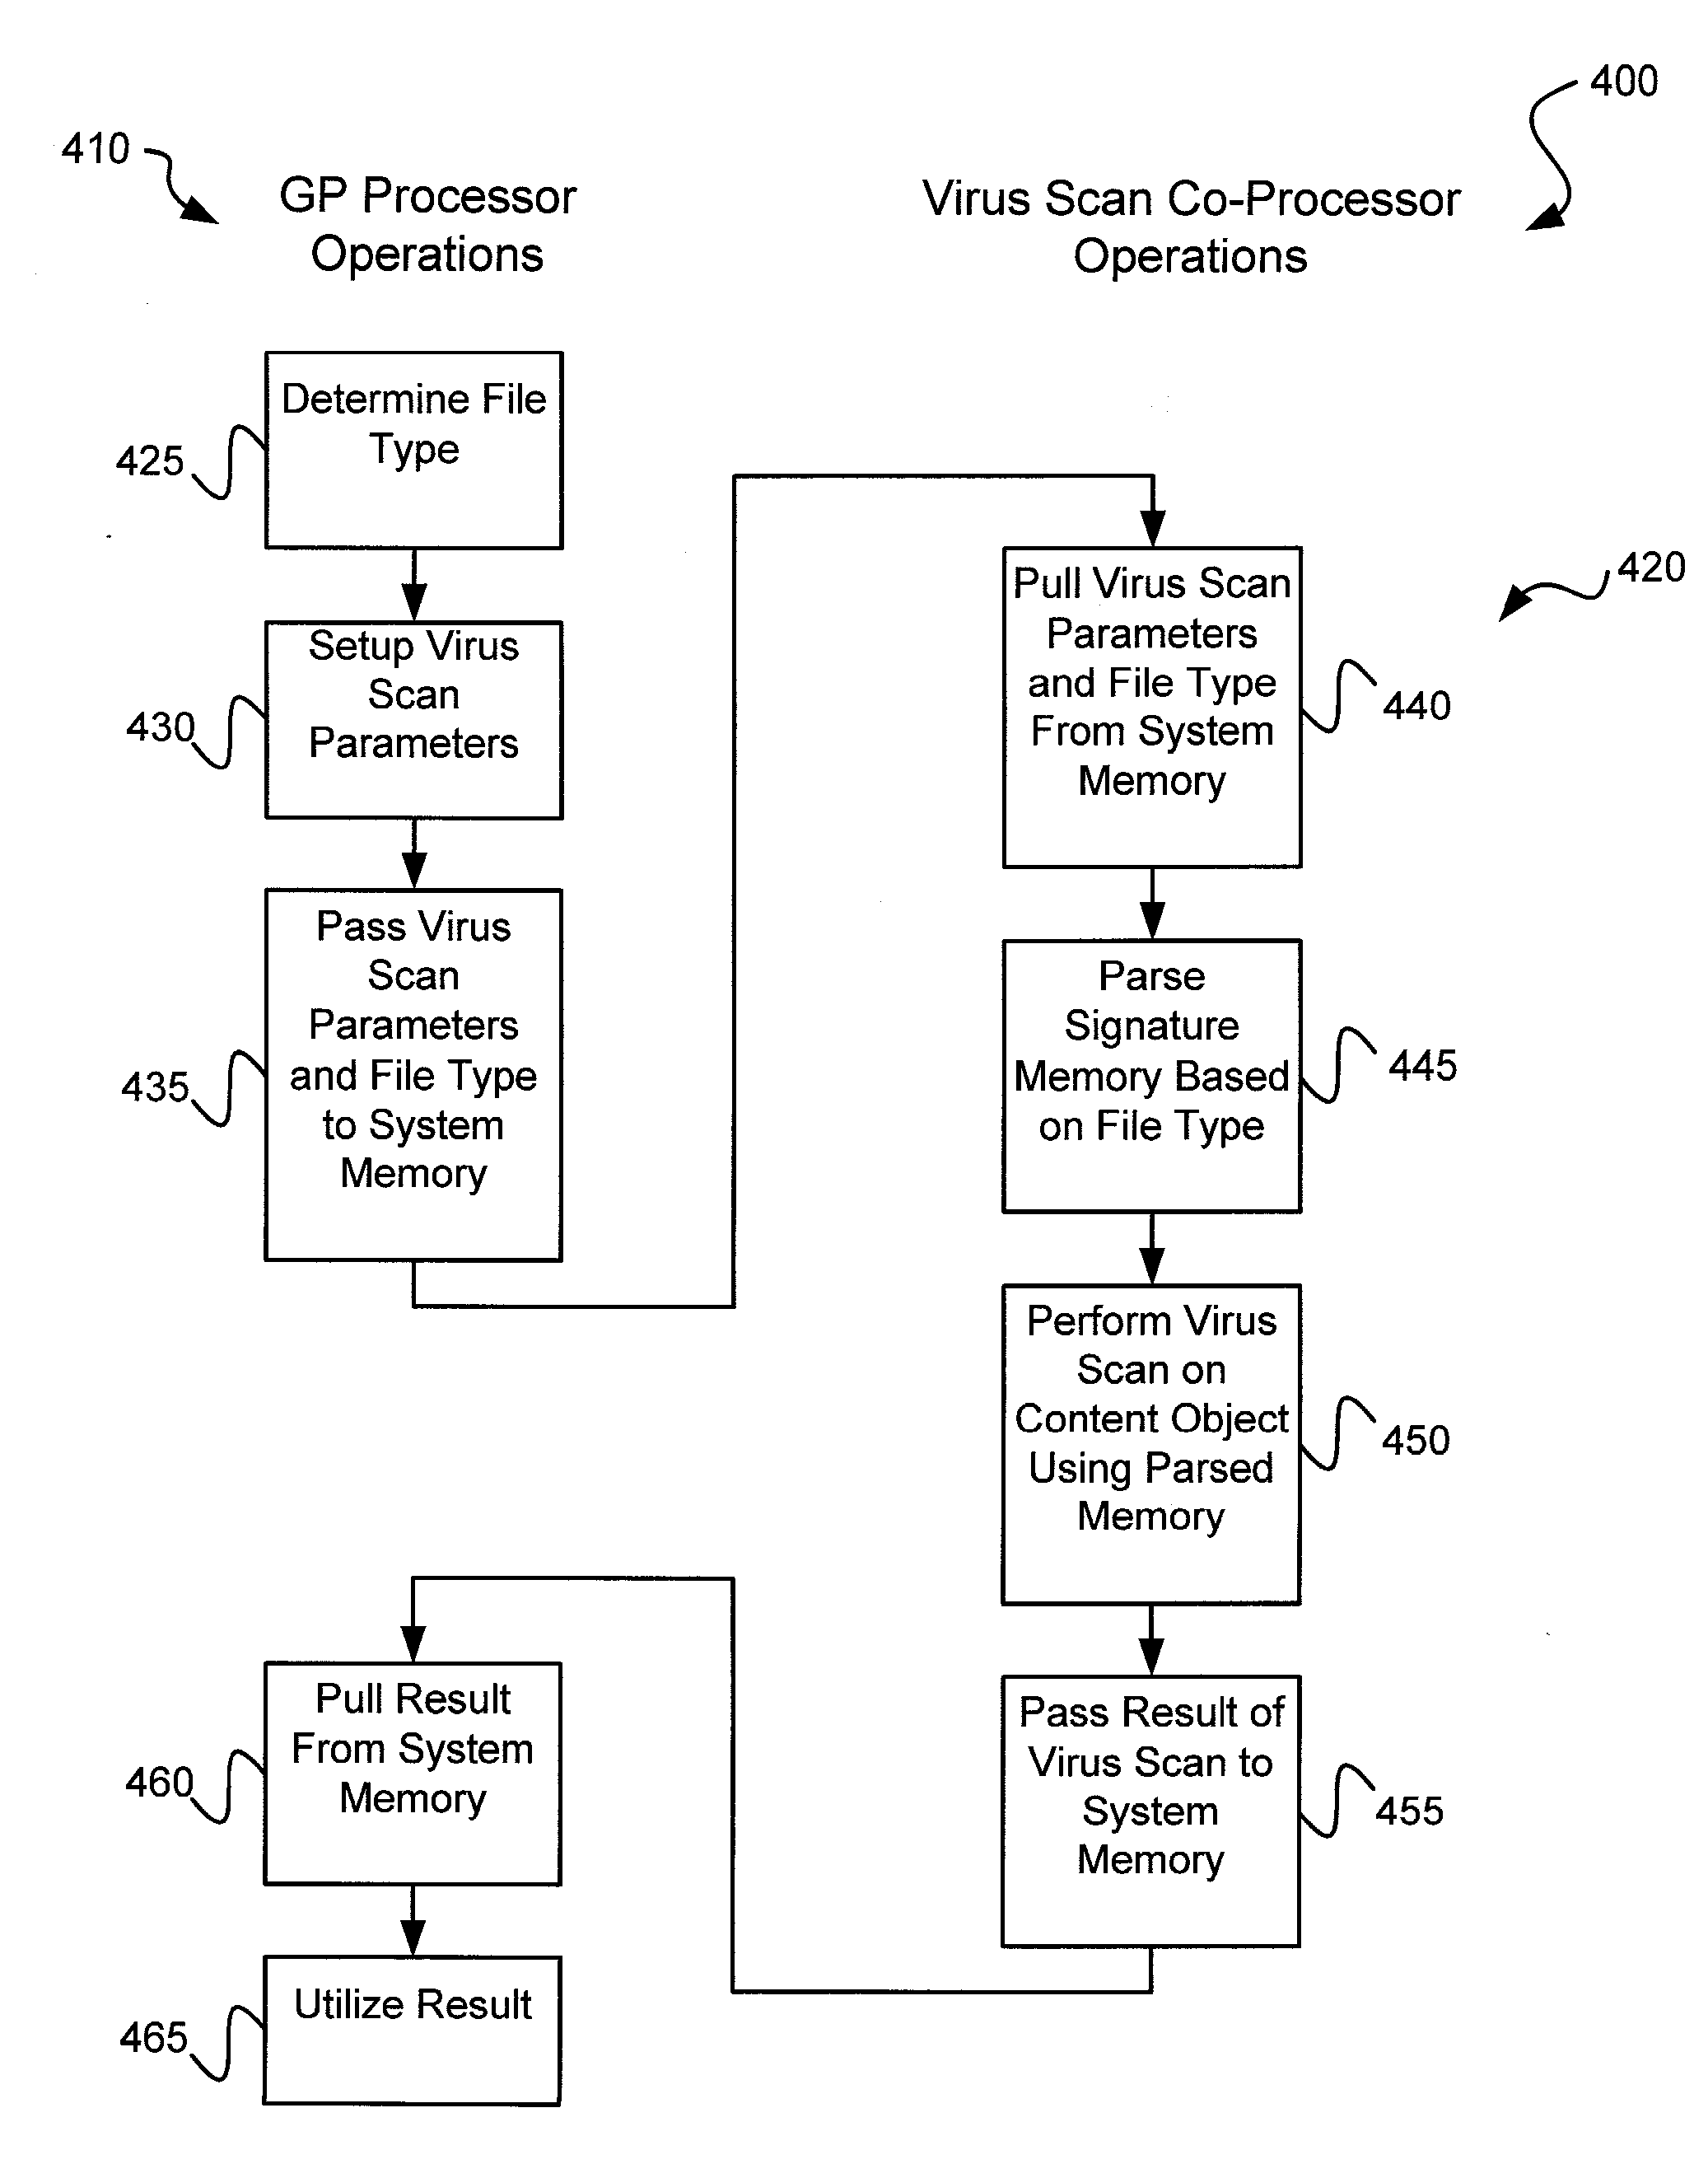 Circuits and methods for efficient data transfer in a virus co-processing system